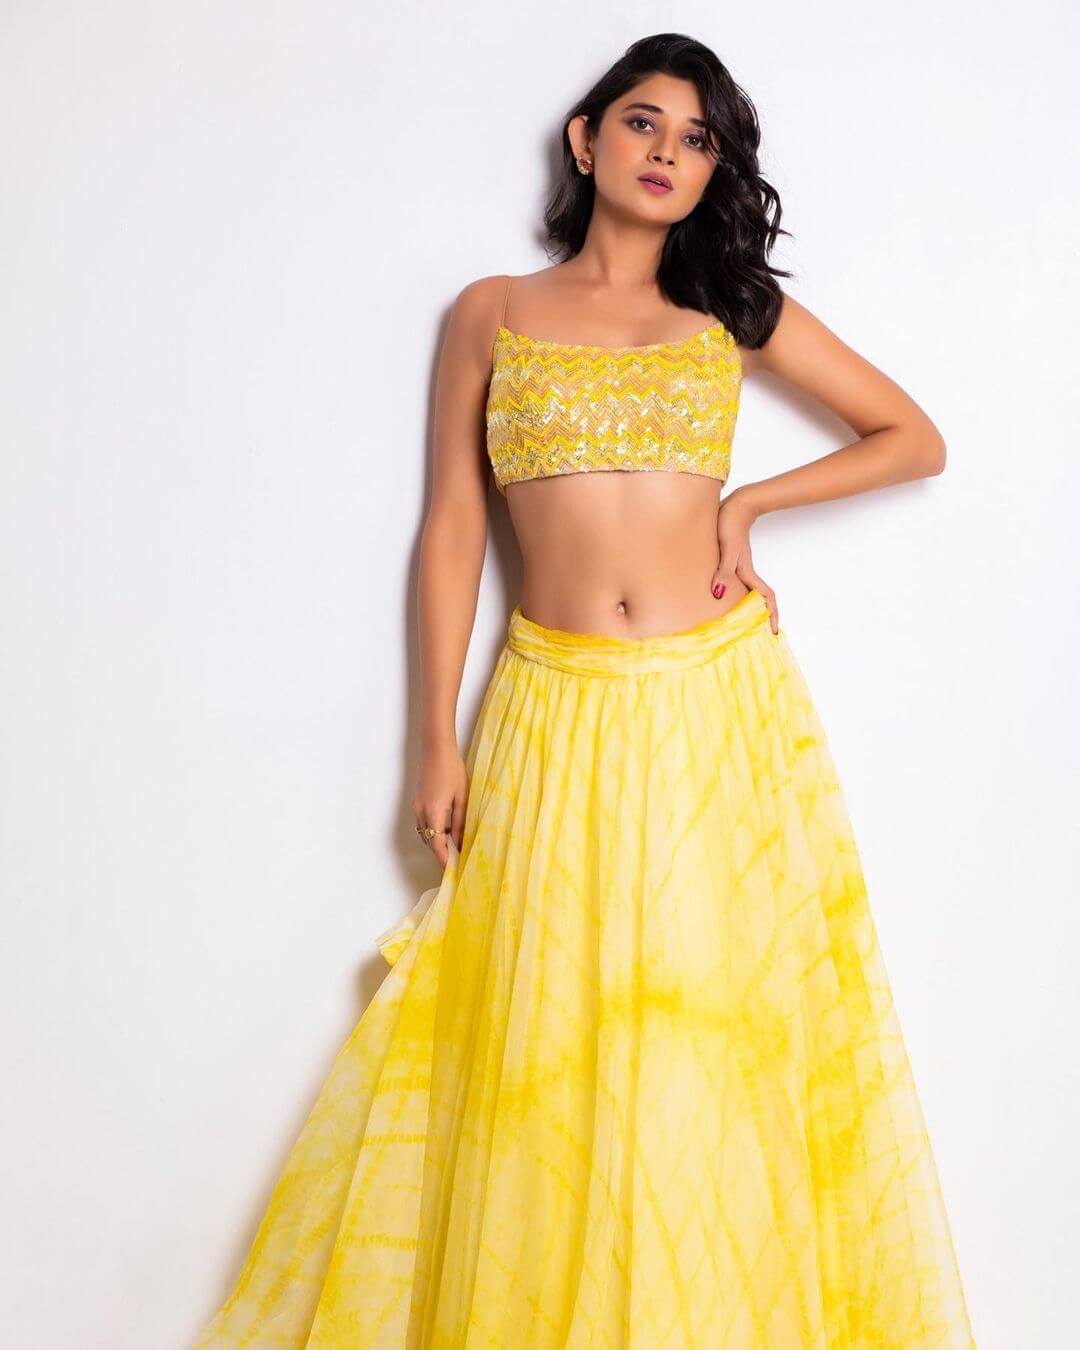 Gorgeous Kanika Mann In Yellow Crop Top With Yellow Skirt Outfit